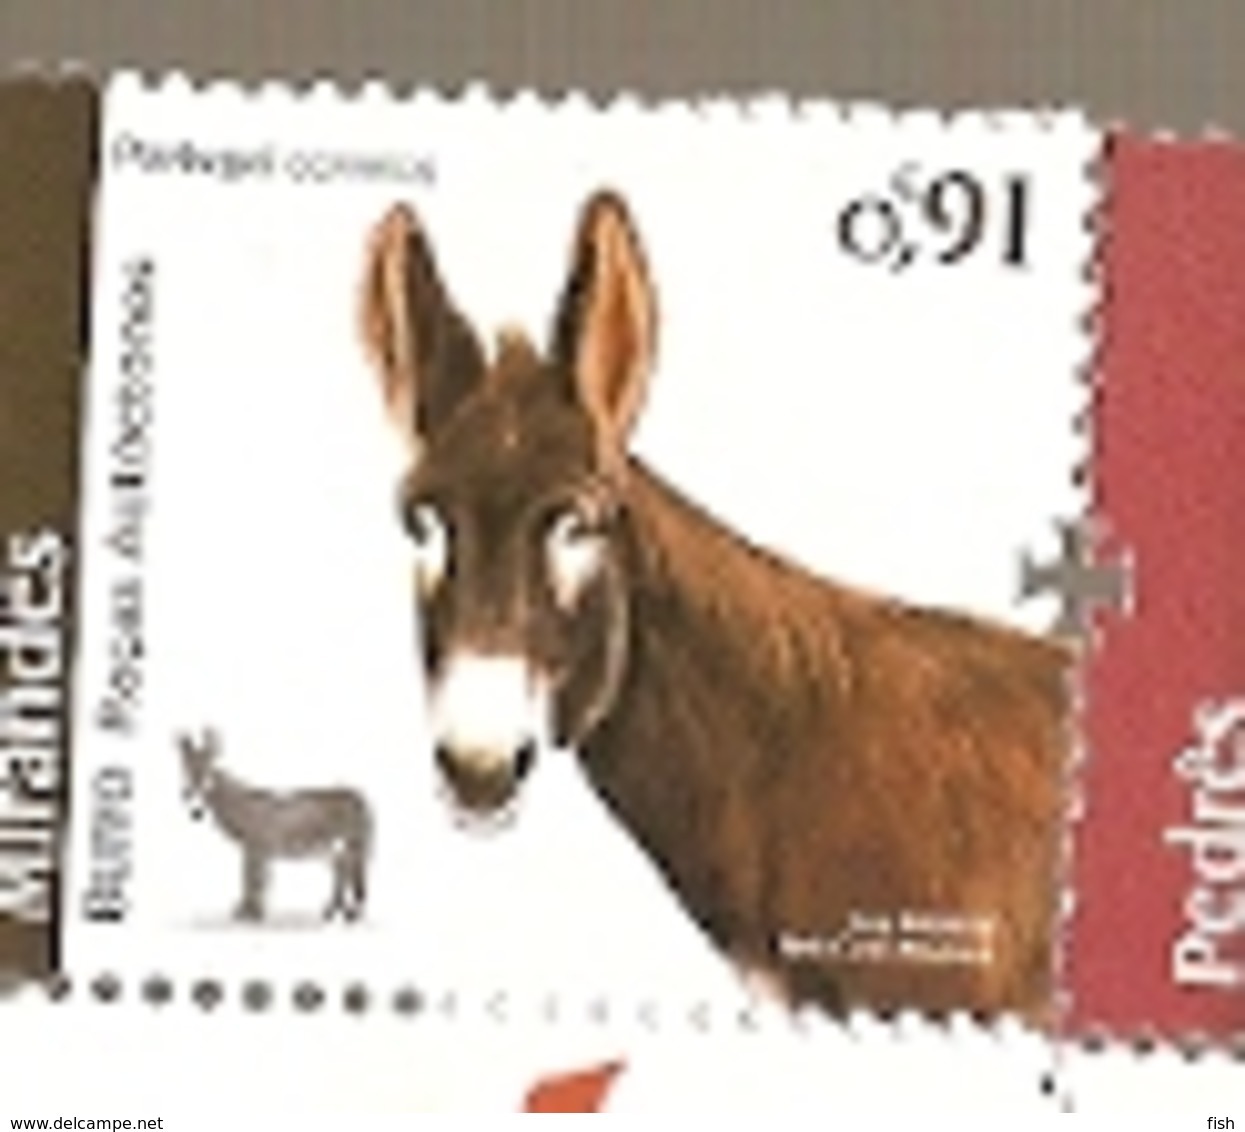 Portugal ** & Autochthonous Breeds Of Portugal, Mirandês Donkeys 2019 (5777) - Burros Y Asnos